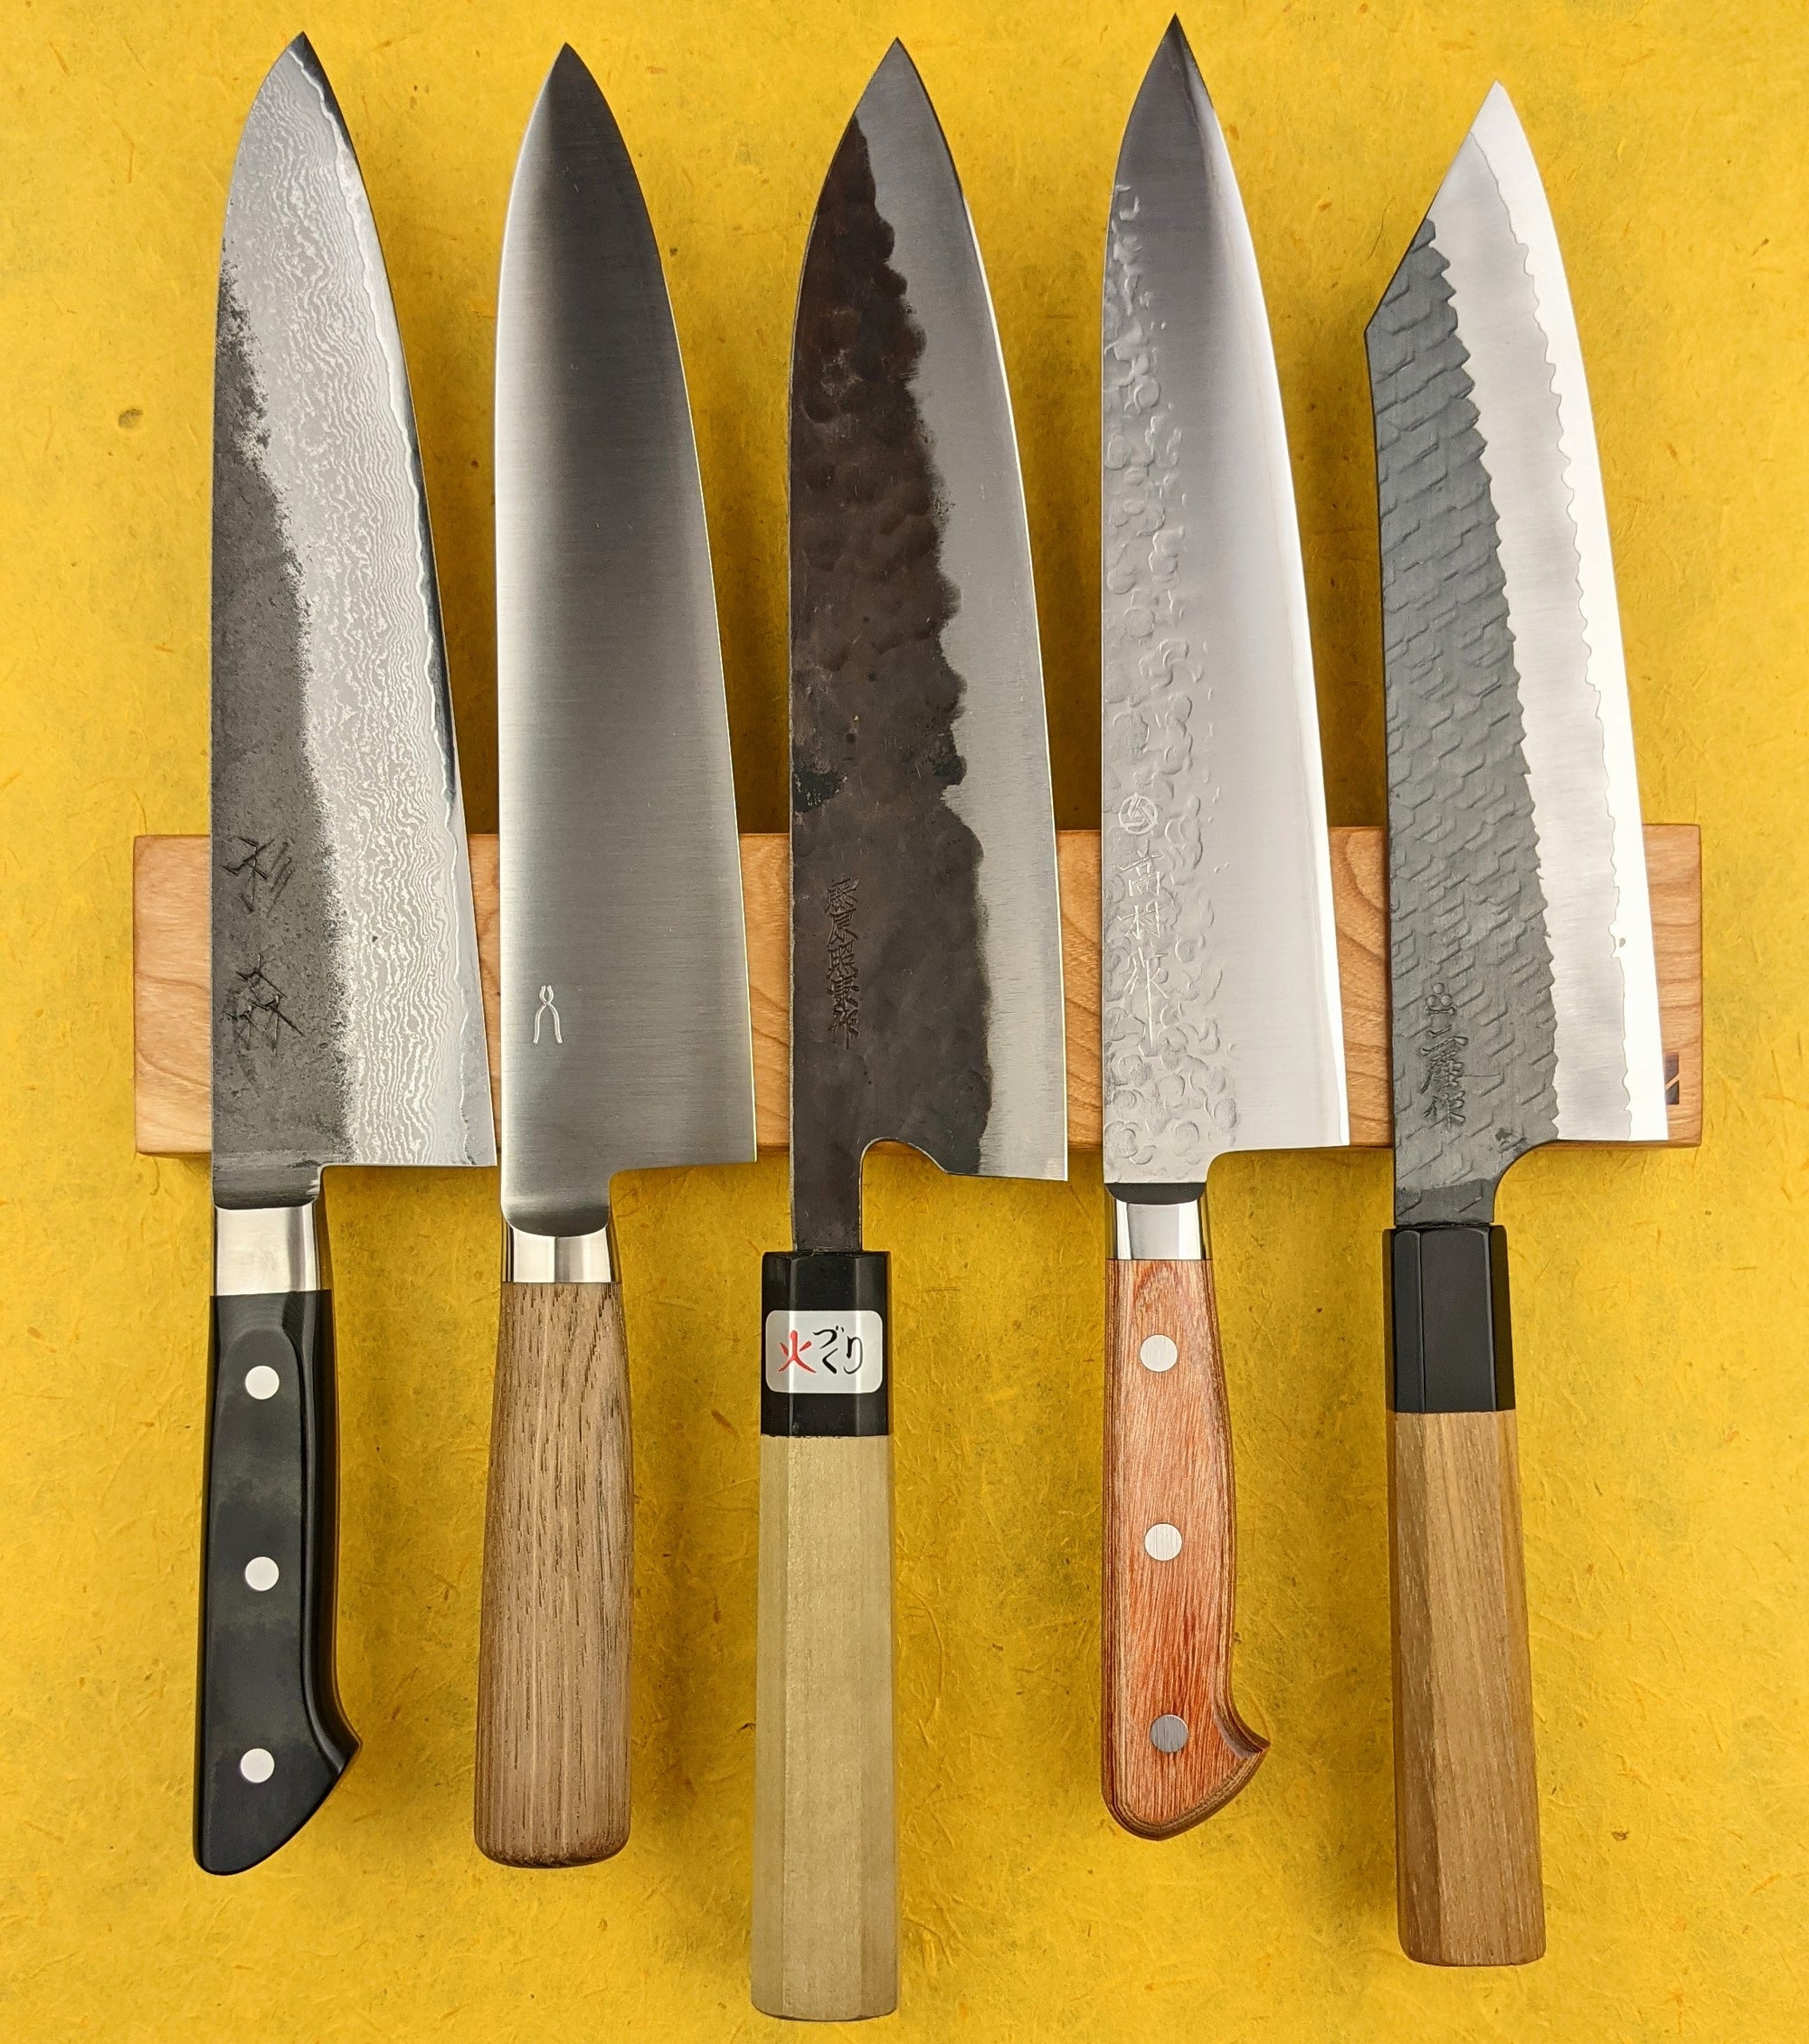 Kevin Kent’s top 5 Chef Knives for Home Cooks